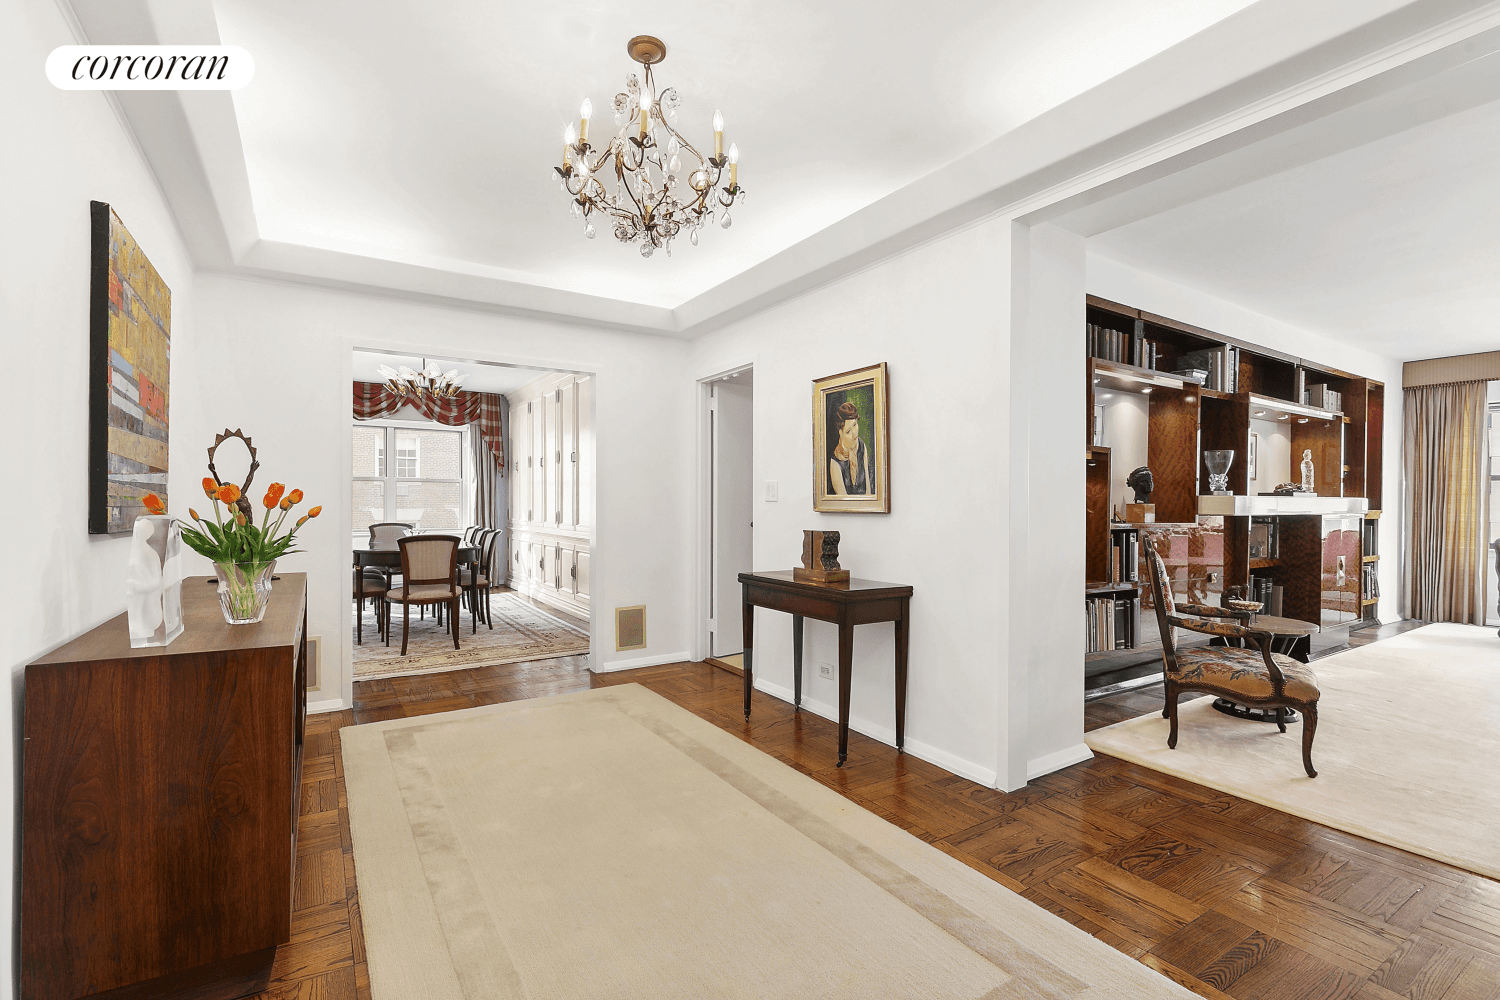 Enjoy the epitome of Classy and Comfortable living on Sutton Place South in this beautiful, bright, and gracious classic six apartment with approximately 1, 900 square feet !